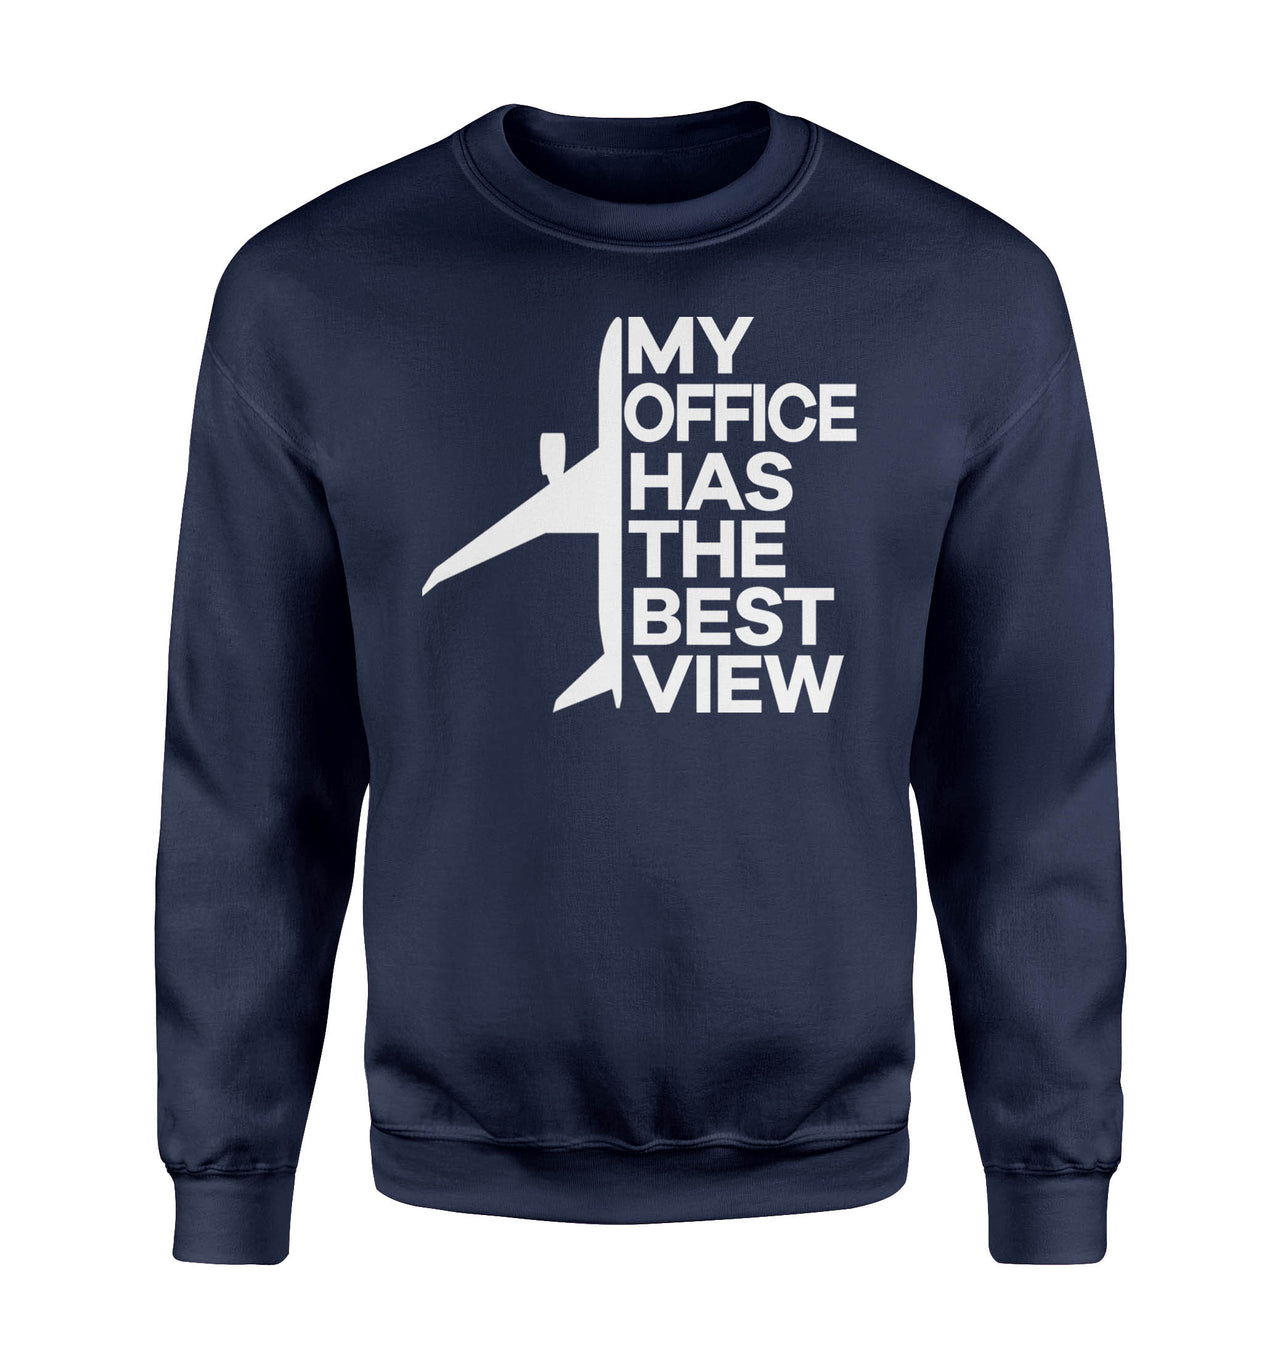 My Office Has The Best View Designed Sweatshirts